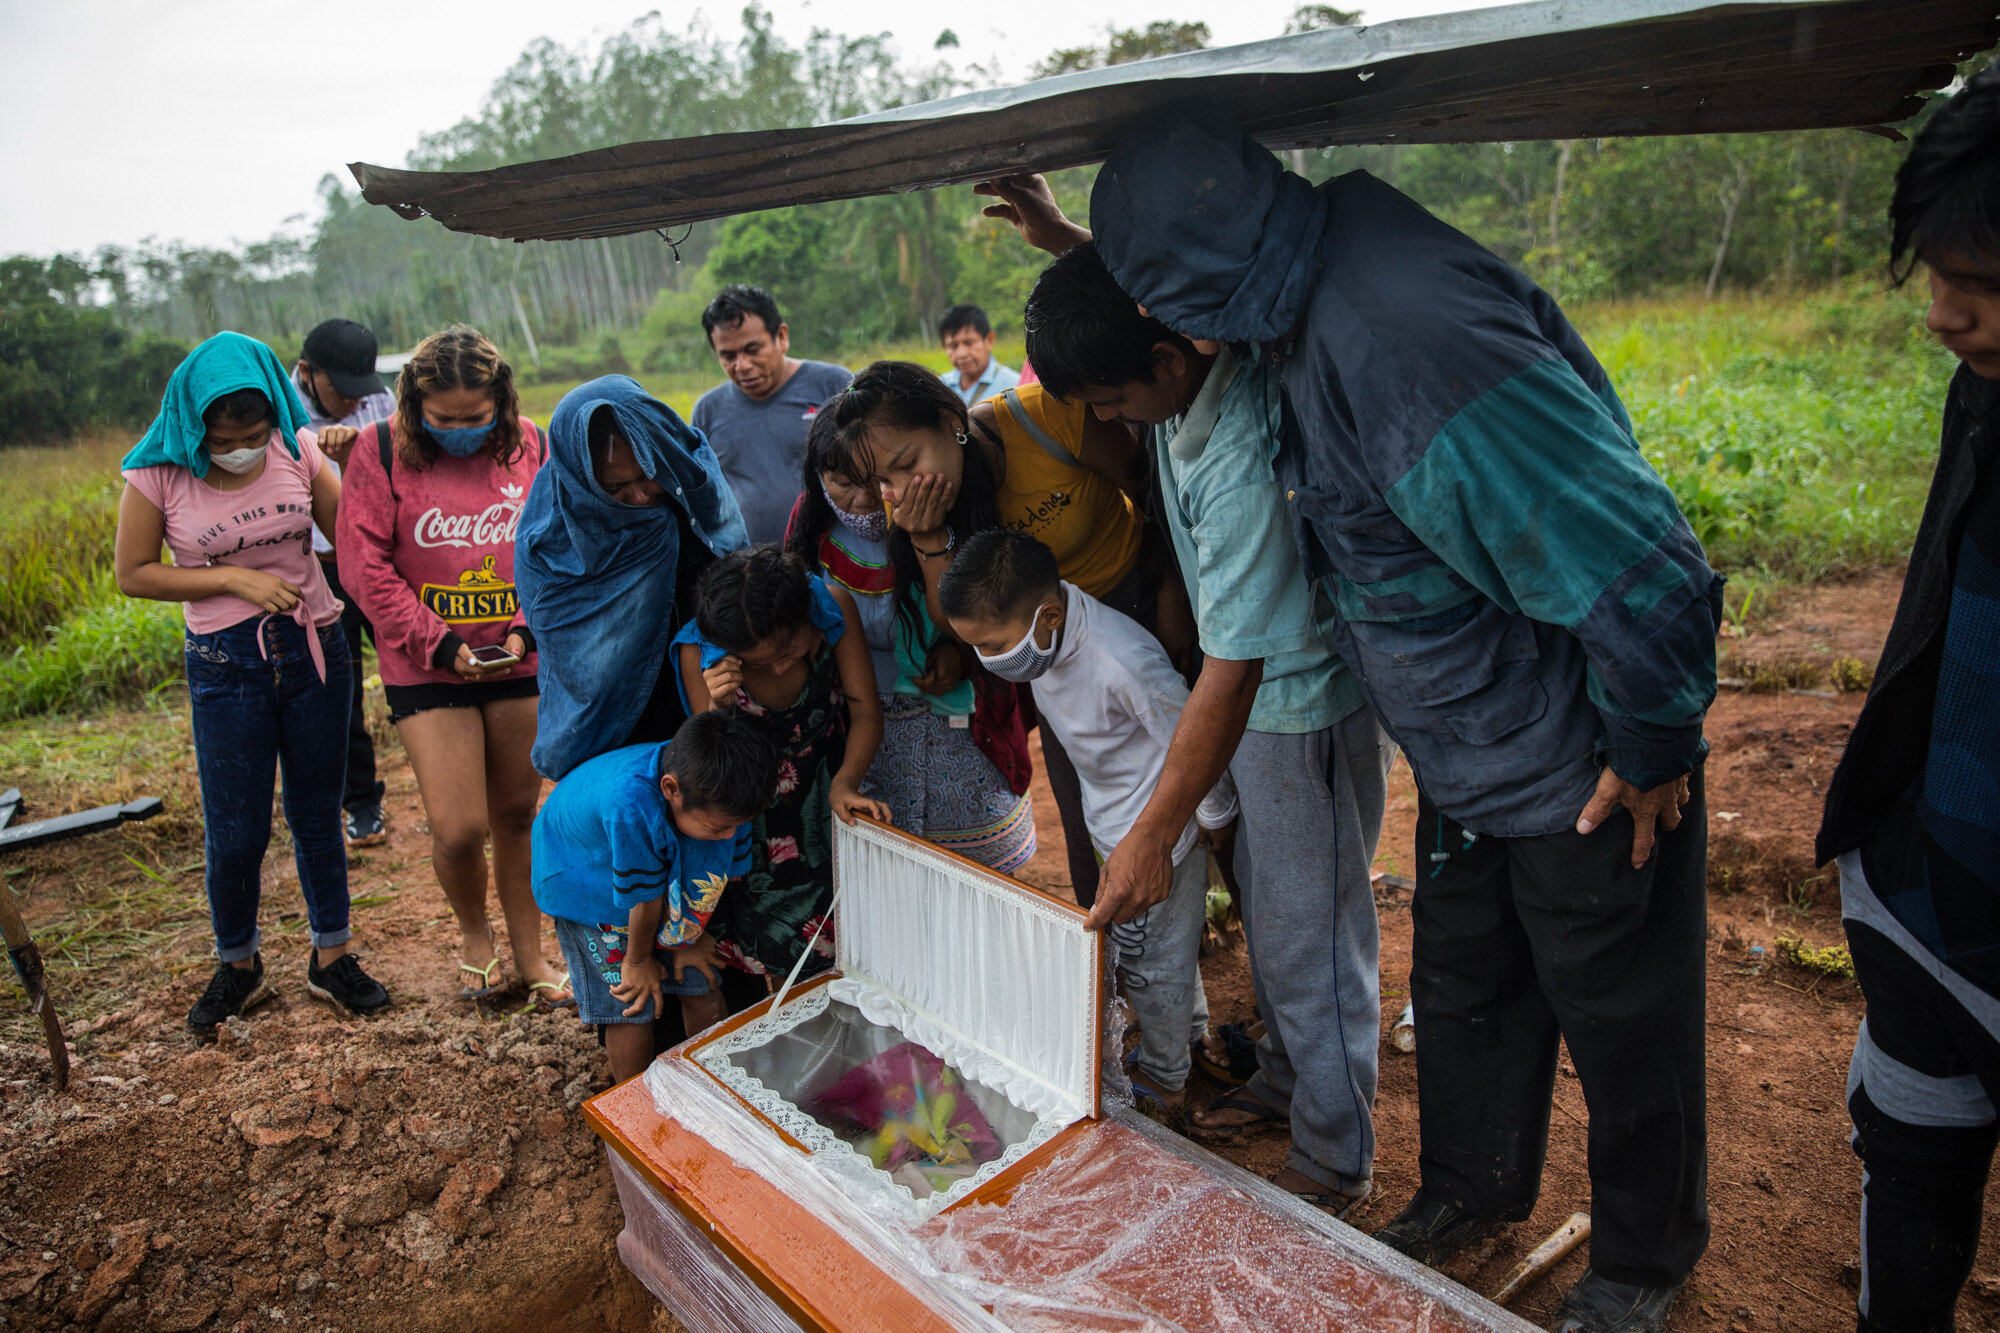  Family members peer into the coffin that contains the remains of Manuela Chavez, who died from symptoms related to the coronavirus at the age of 88, during a burial service in the Shipibo indigenous community of Pucallpa, in Peru's Ucayali region, o